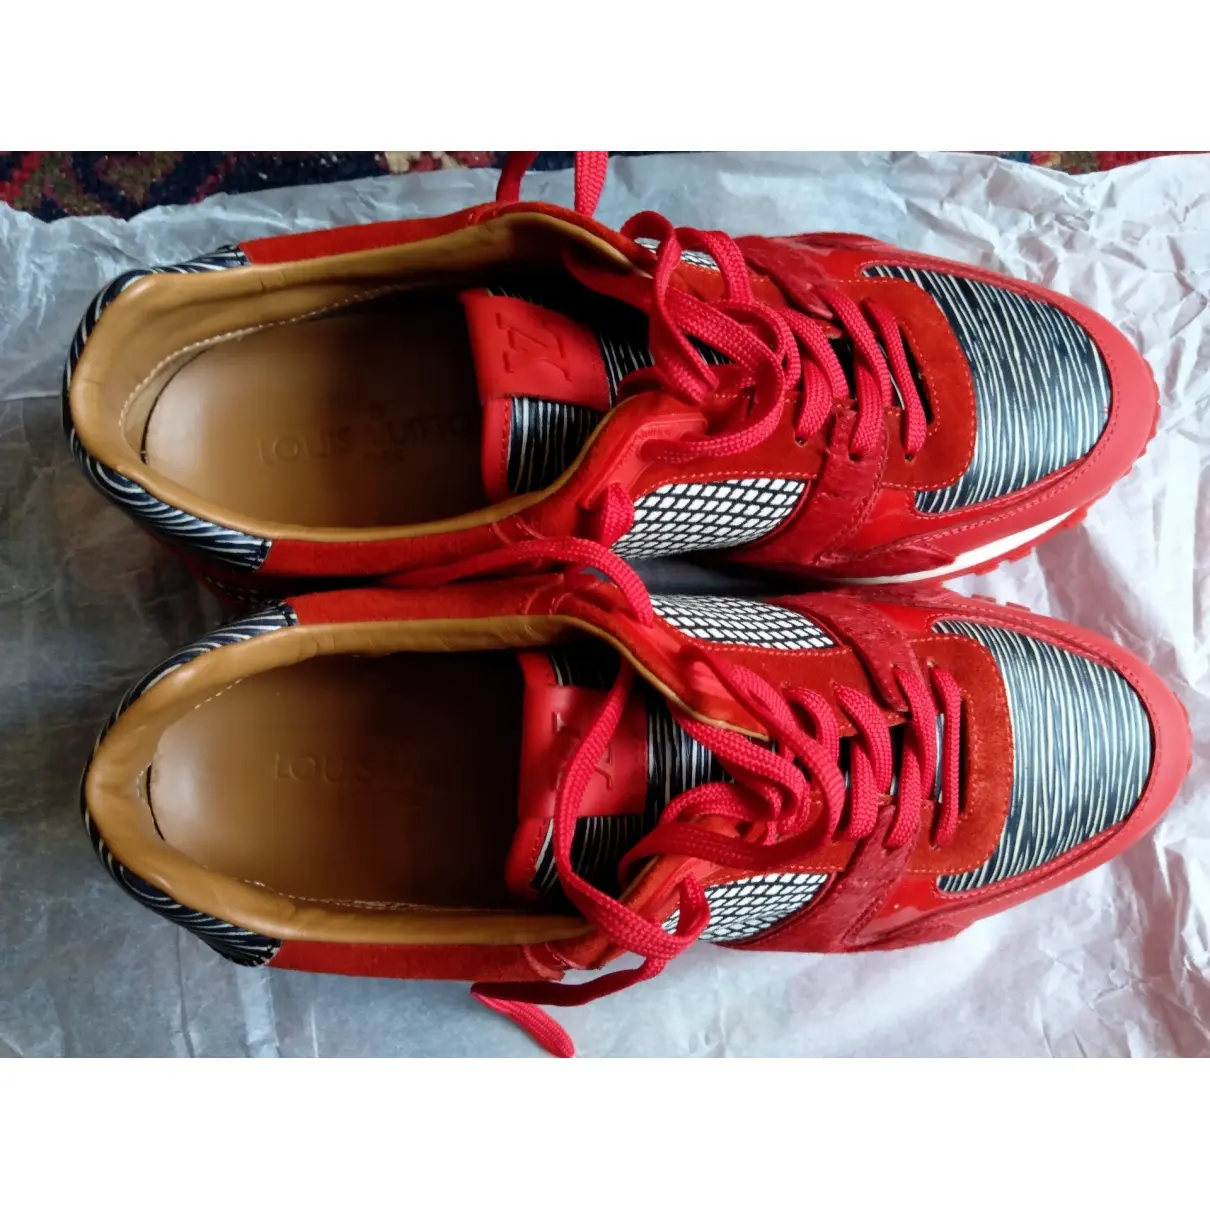 Louis Vuitton Run Away leather trainers for sale